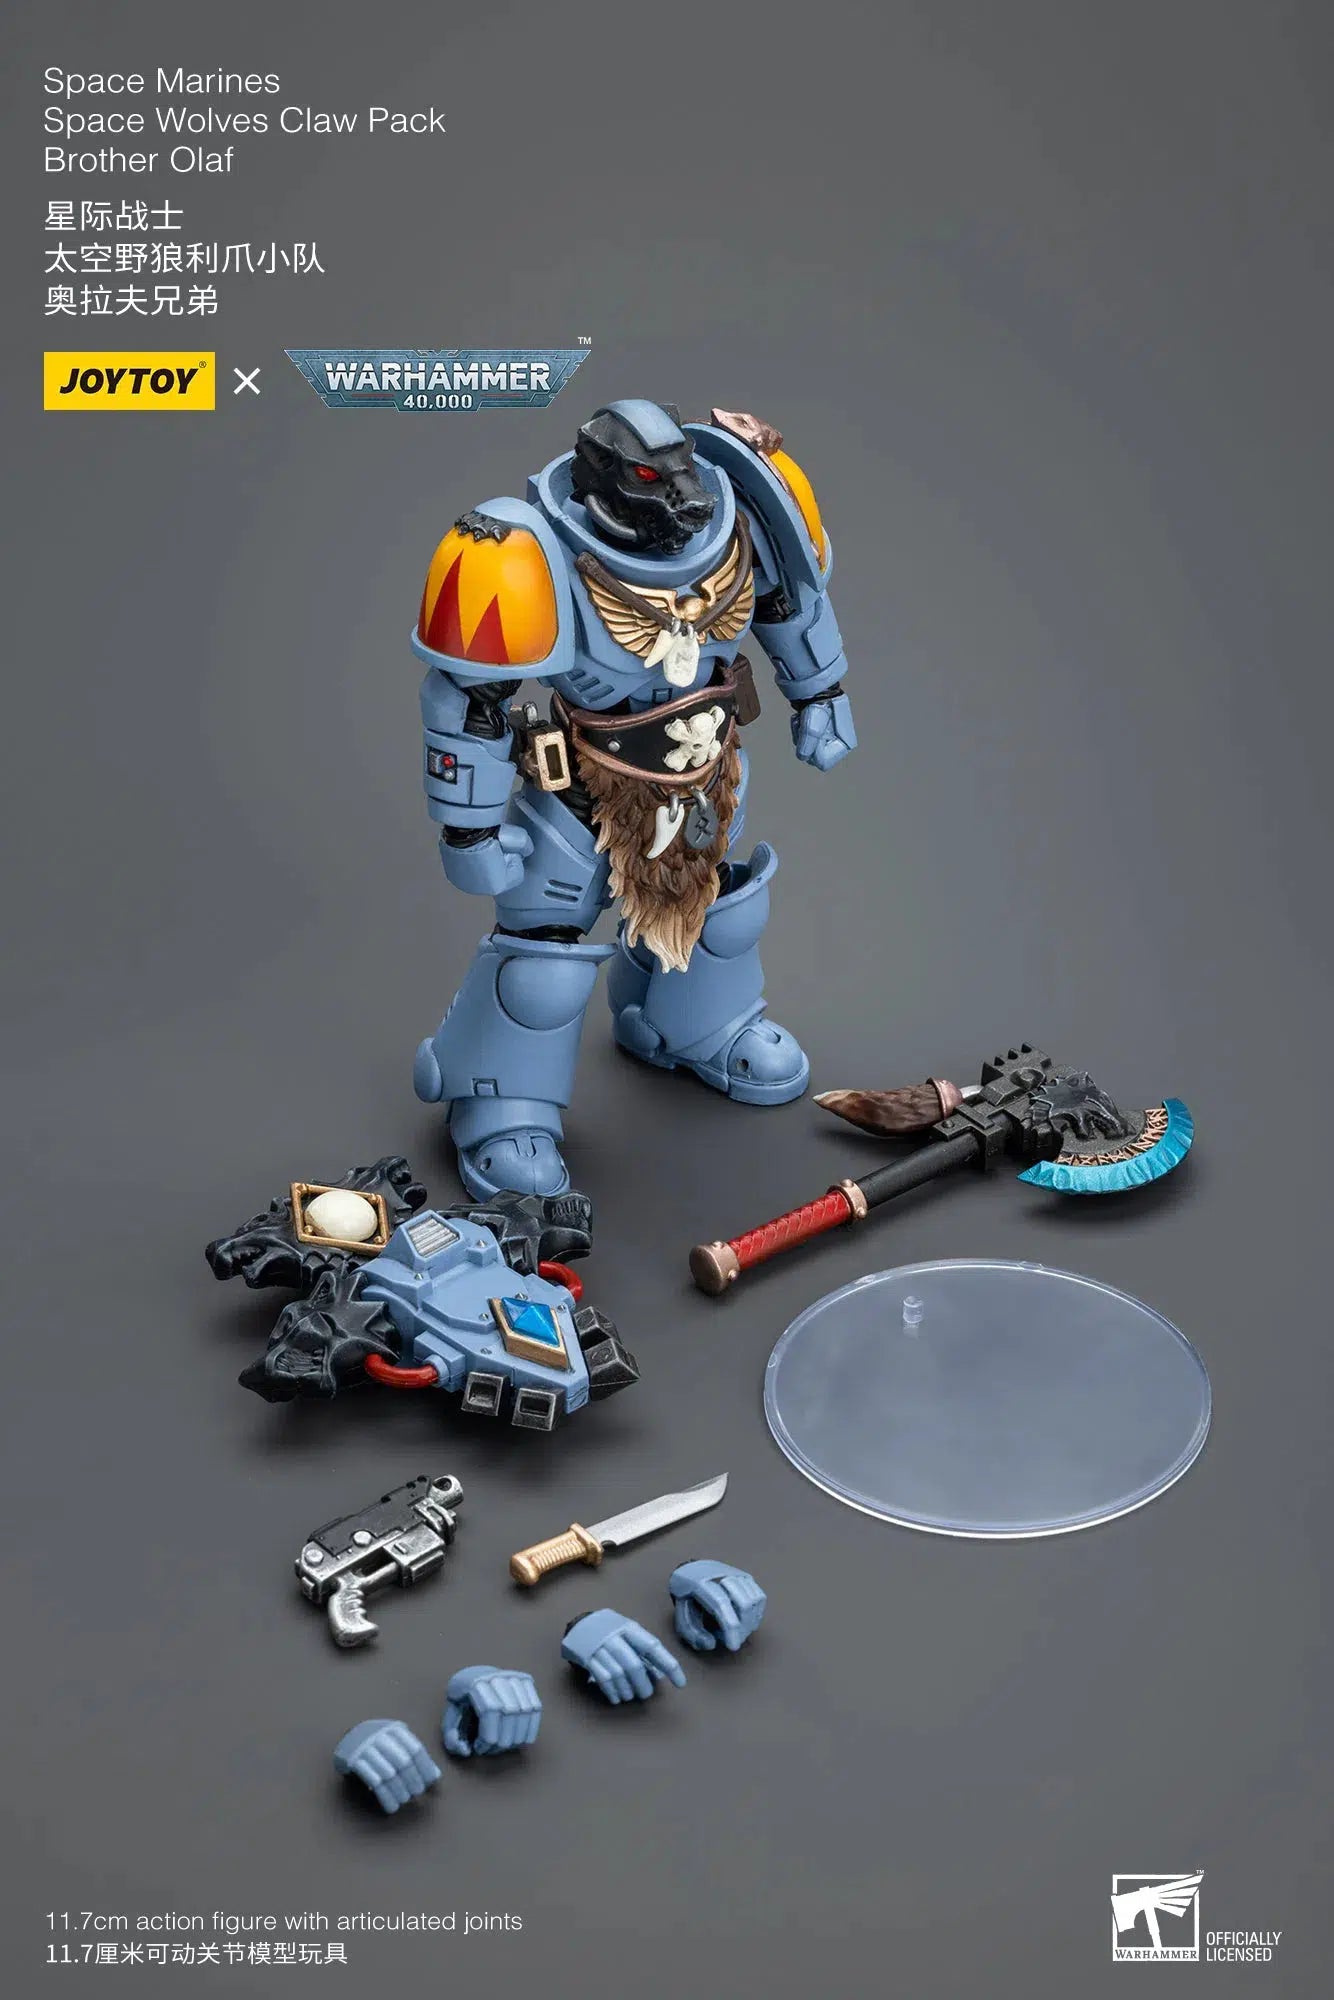 Warhammer 40K: Space Wolves: Claw Pack: Brother Olaf: Joy Toy